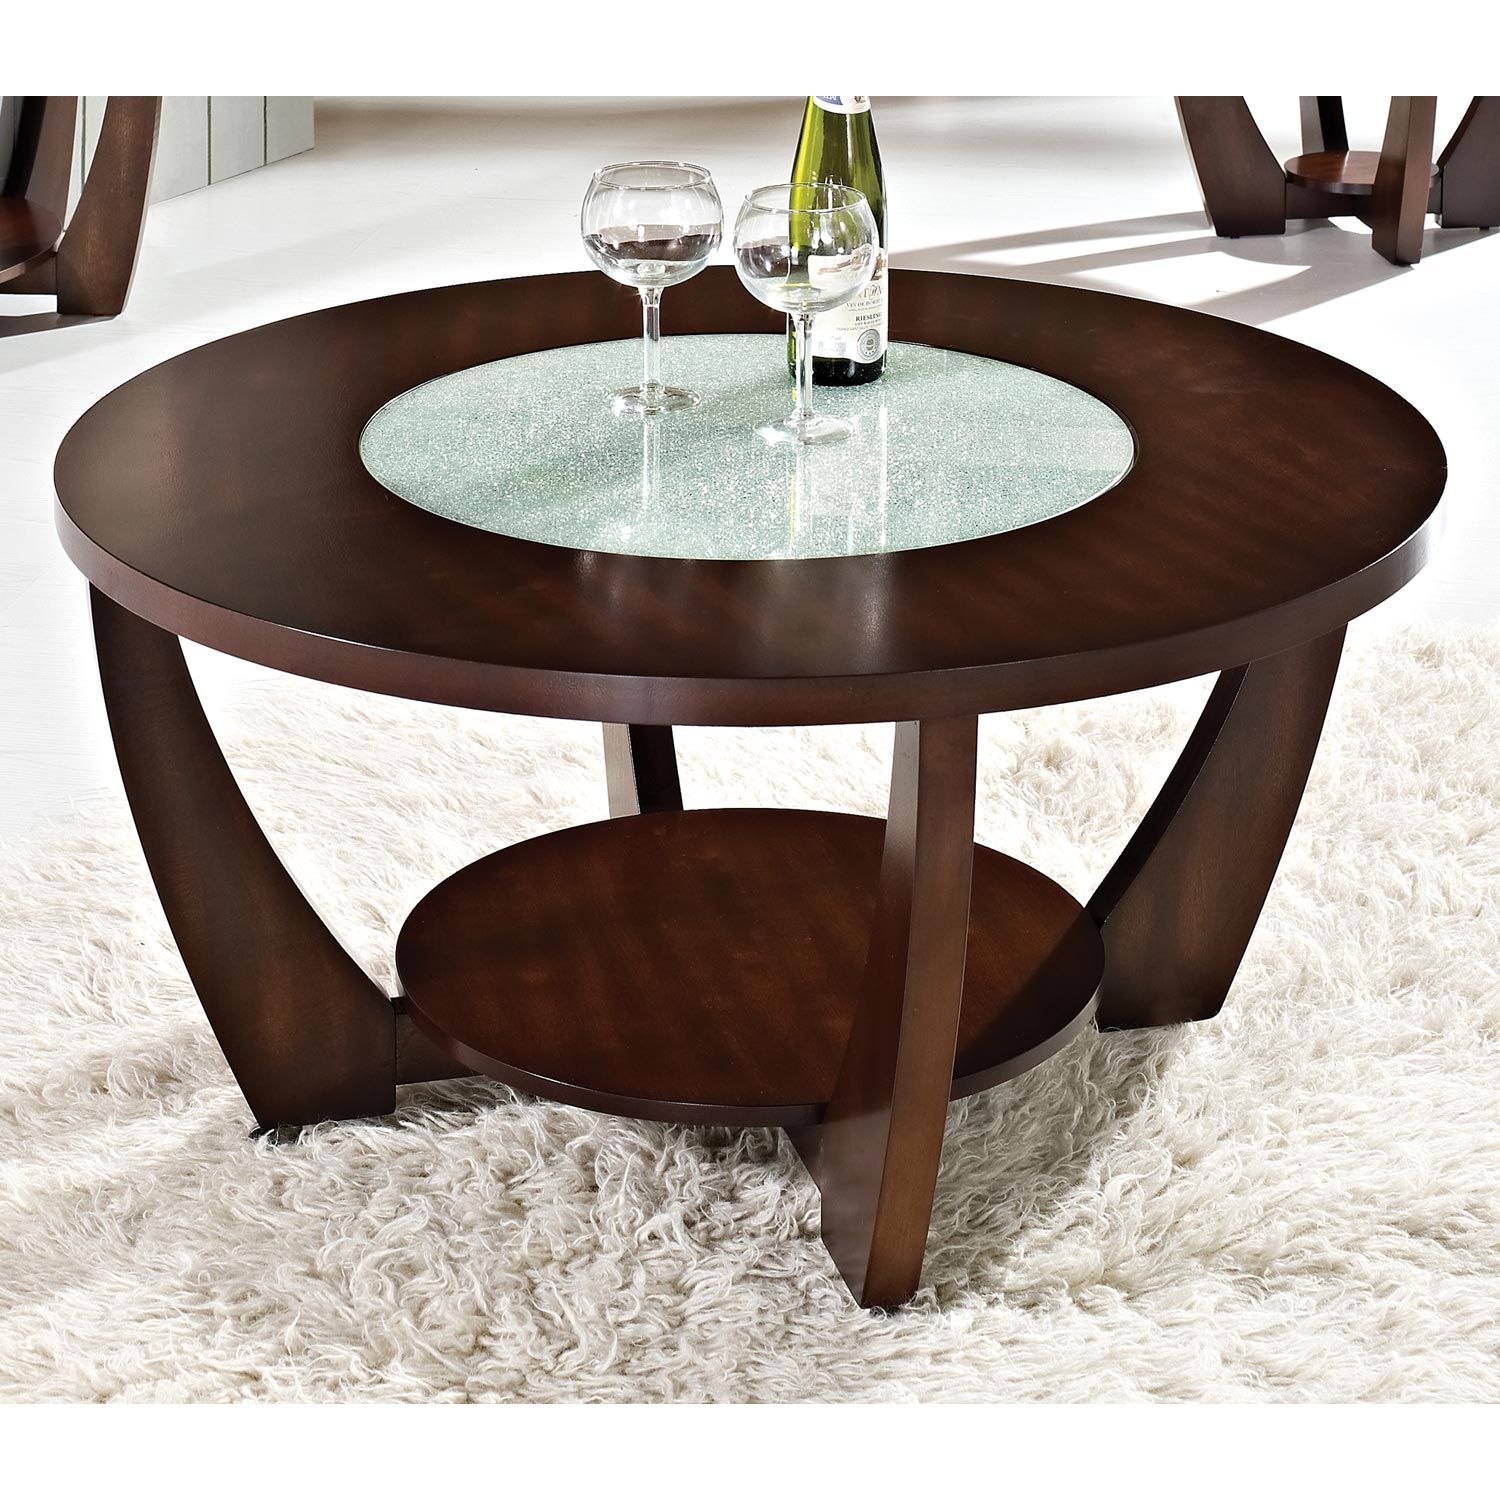 Rafael Round Coffee Table – Crackled Glass, Dark Cherry Wood | Dcg Stores Within Round Coffee Tables (View 10 of 15)